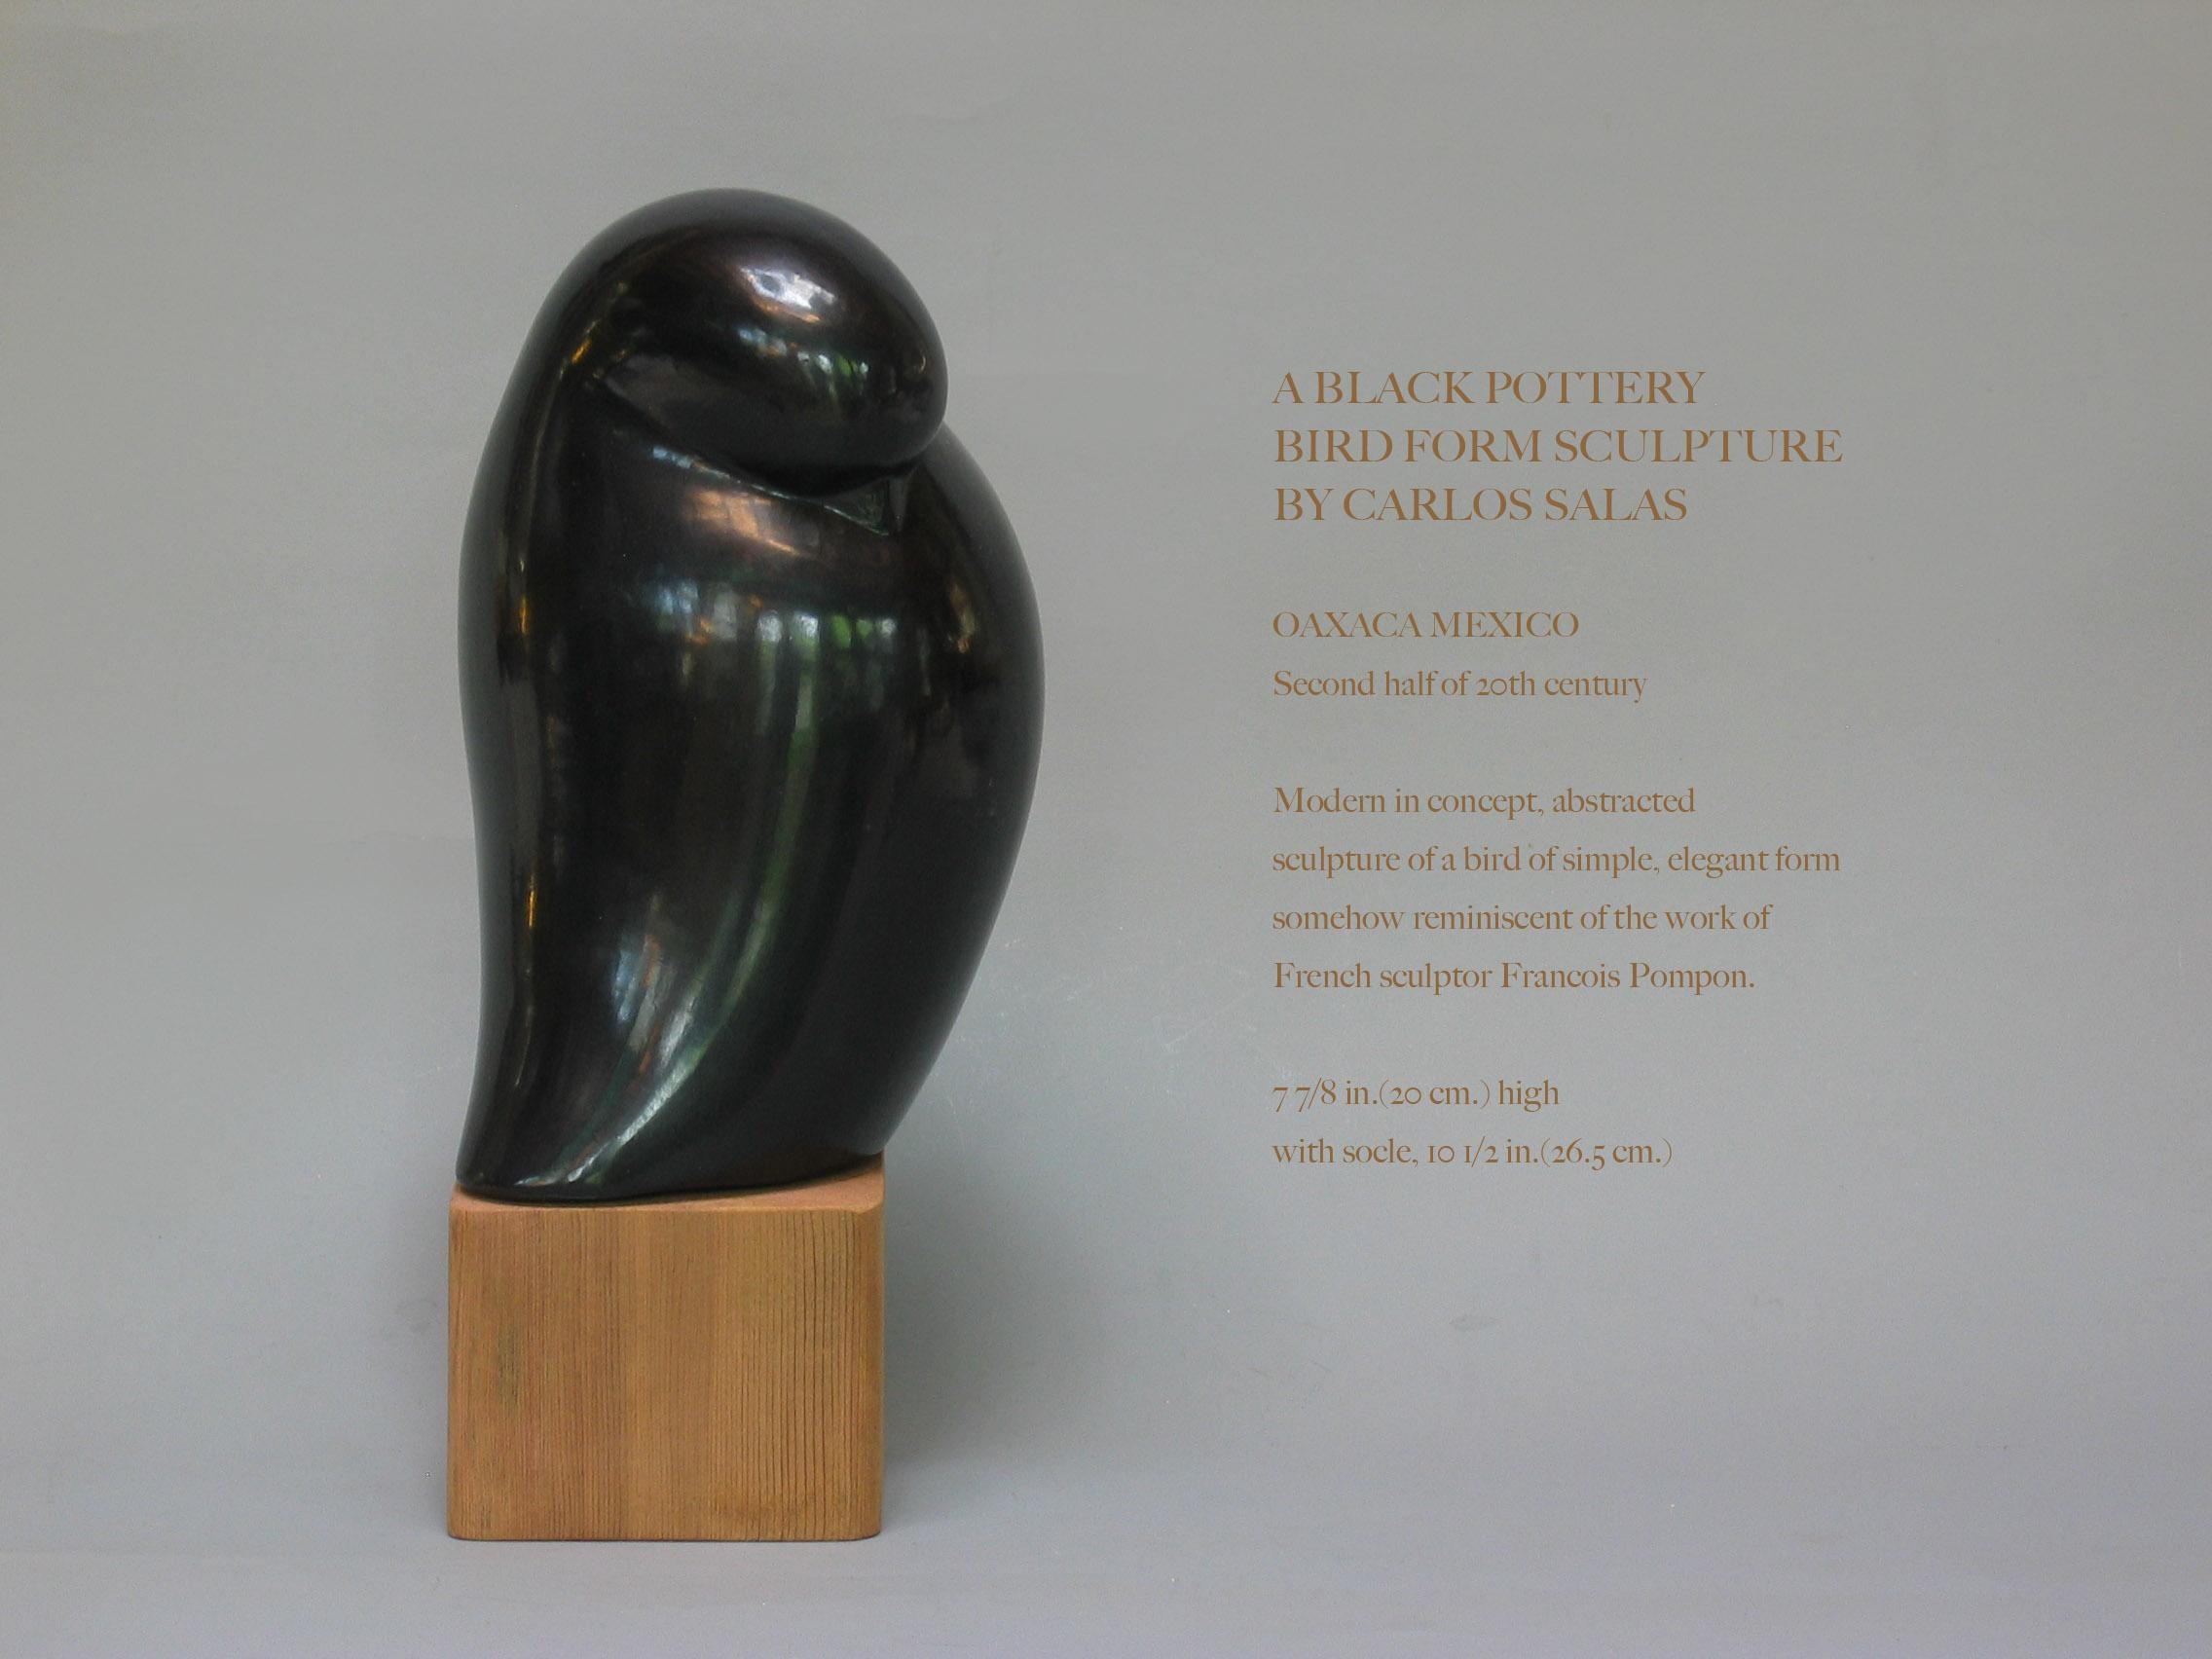 A black pottery bird form sculpture
By Carlos Salas

Oaxaca Mexico
Second half of 20th century.

Modern in concept, abstracted
sculpture of a bird of simple, elegant form
somehow reminiscent of the work of
French sculptor Francois